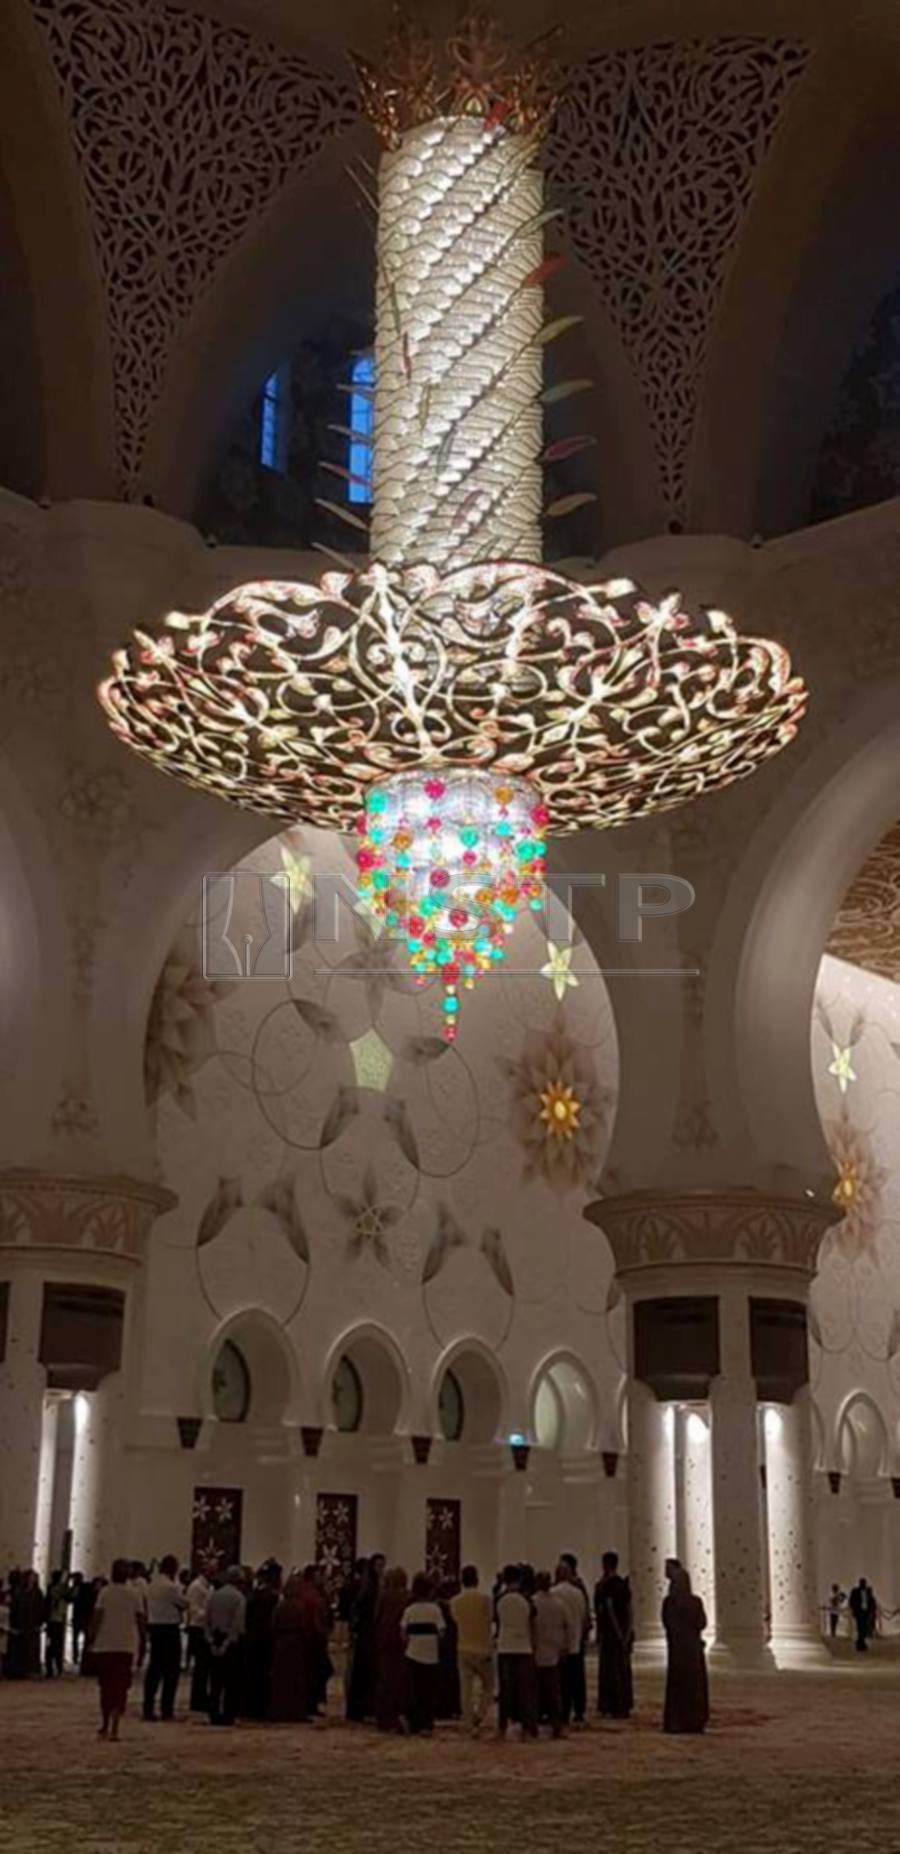 At 10min diameter and 15m in height, this is the second largest known chandelier inside a mosque and the third largest in the world.